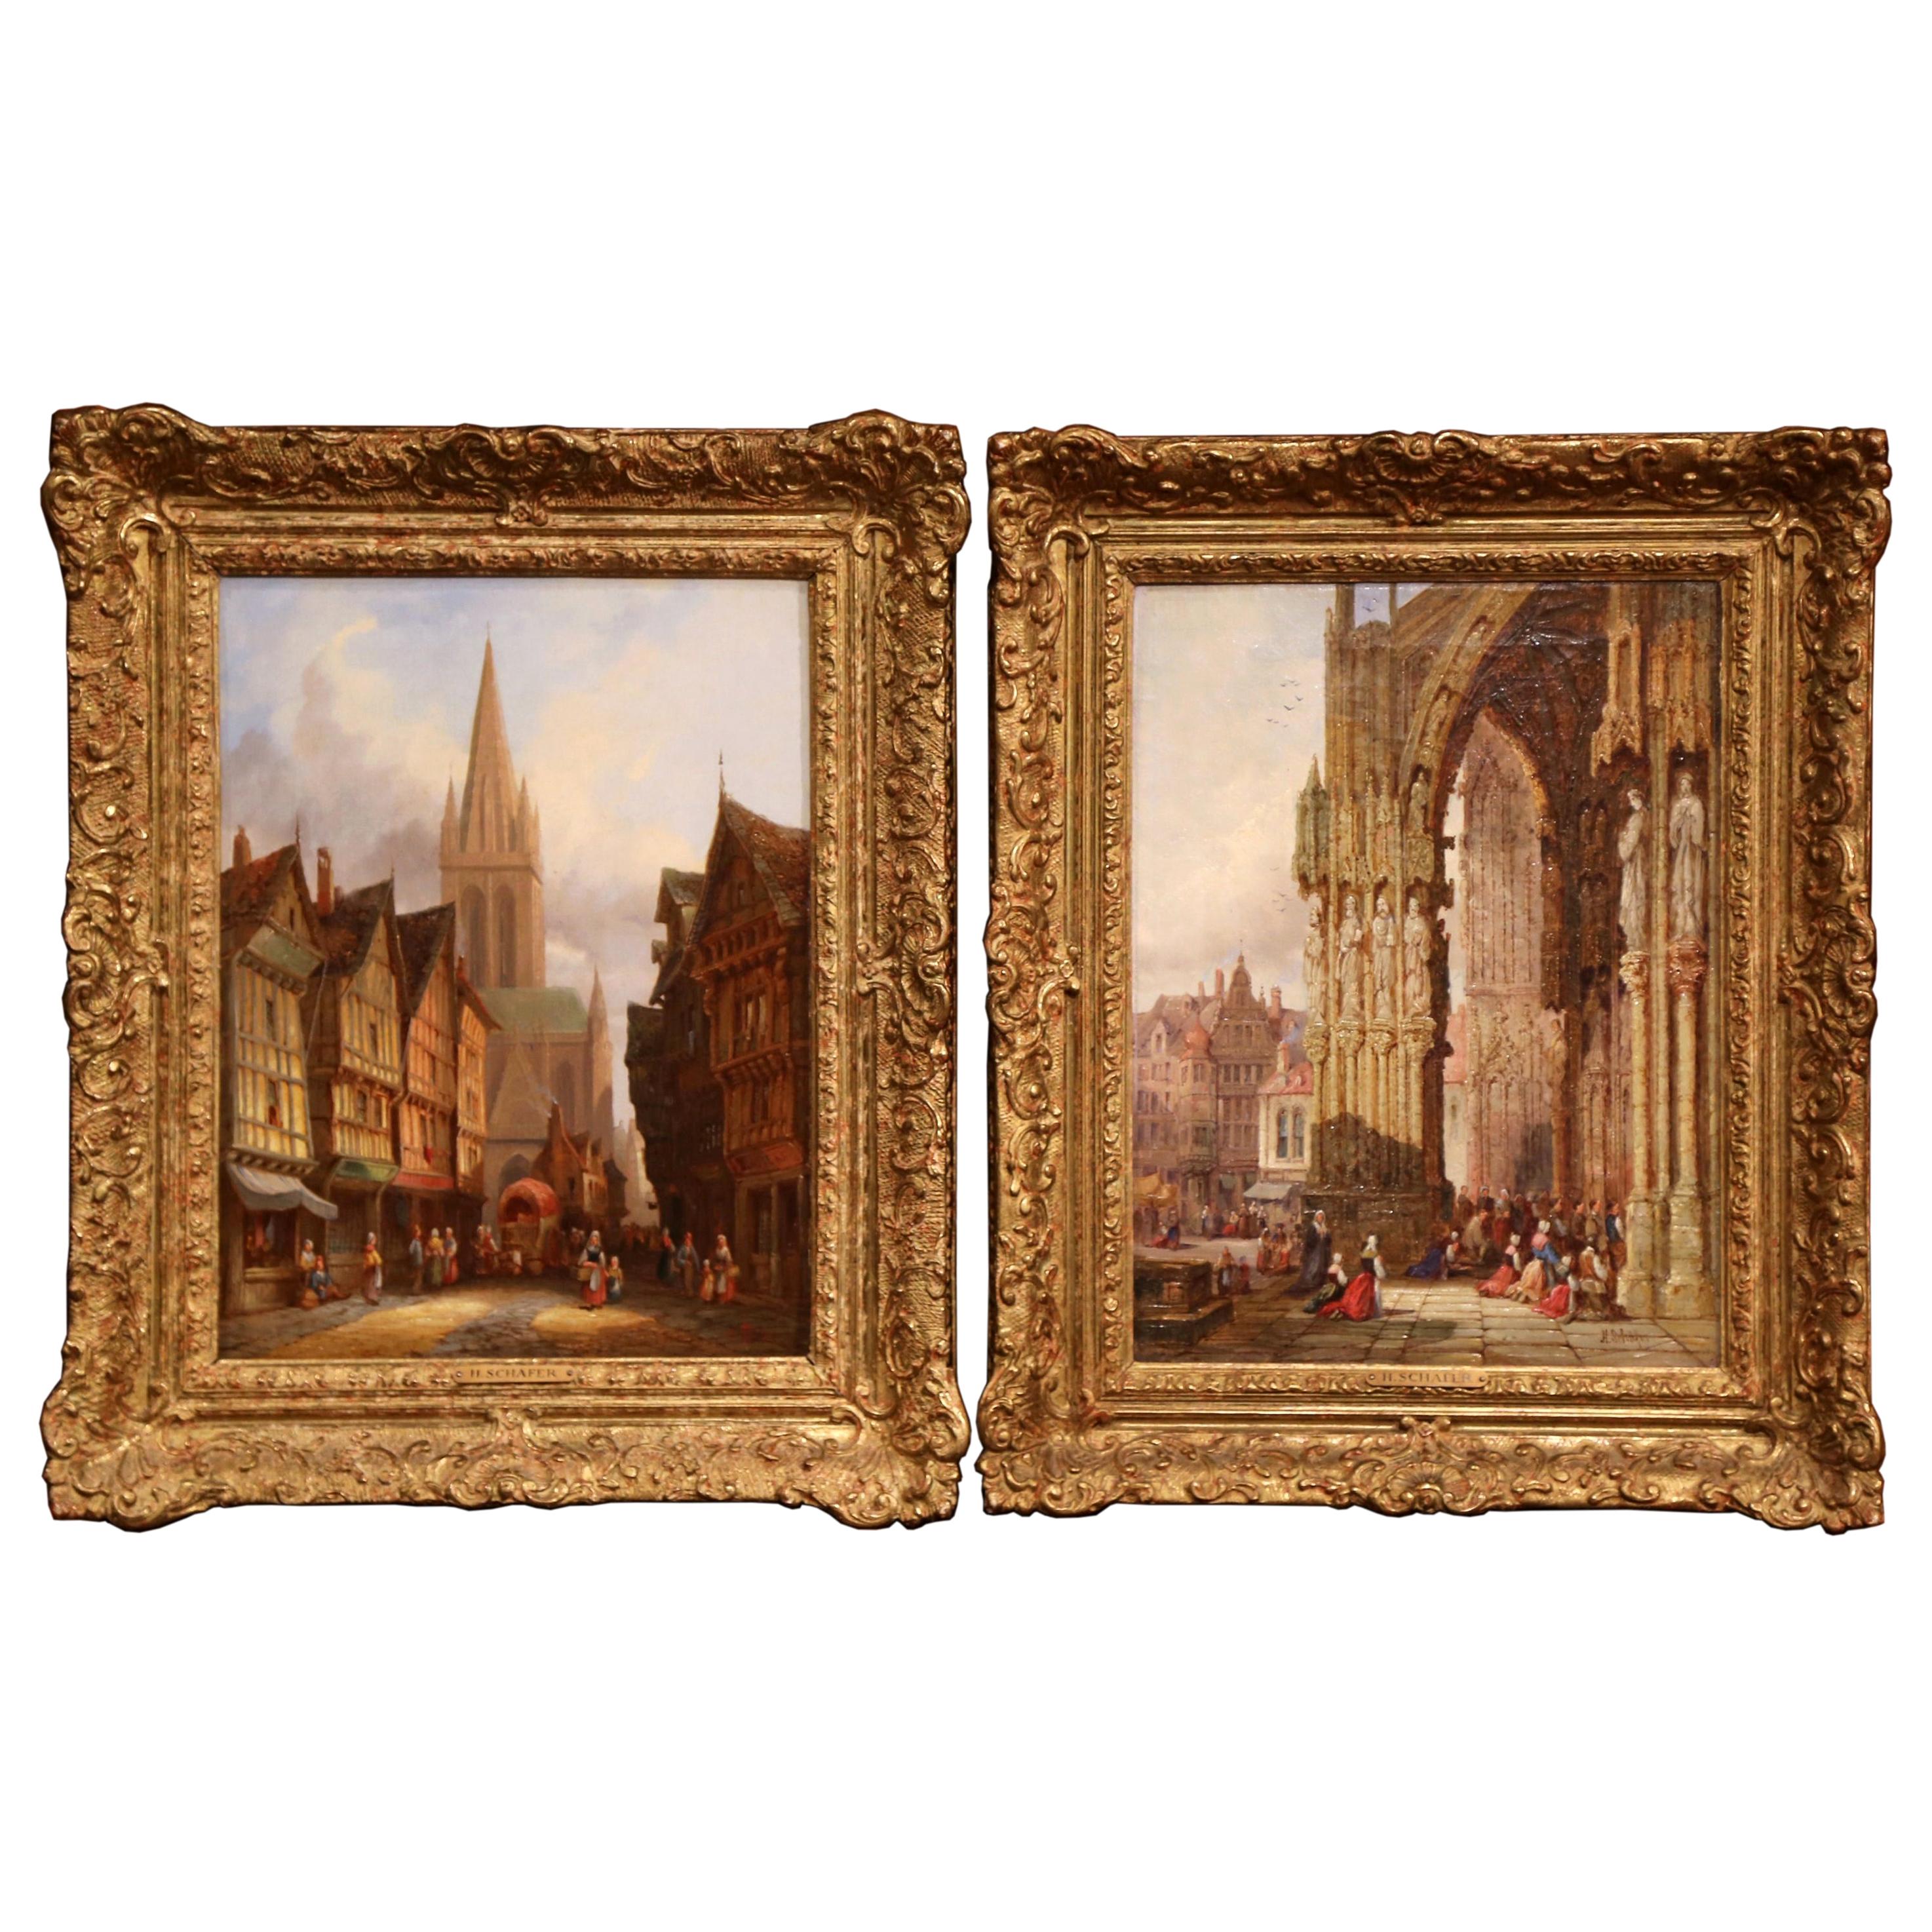 Pair of 19th Century Framed Street Scenes Oil Paintings Signed Henry T. Schafer